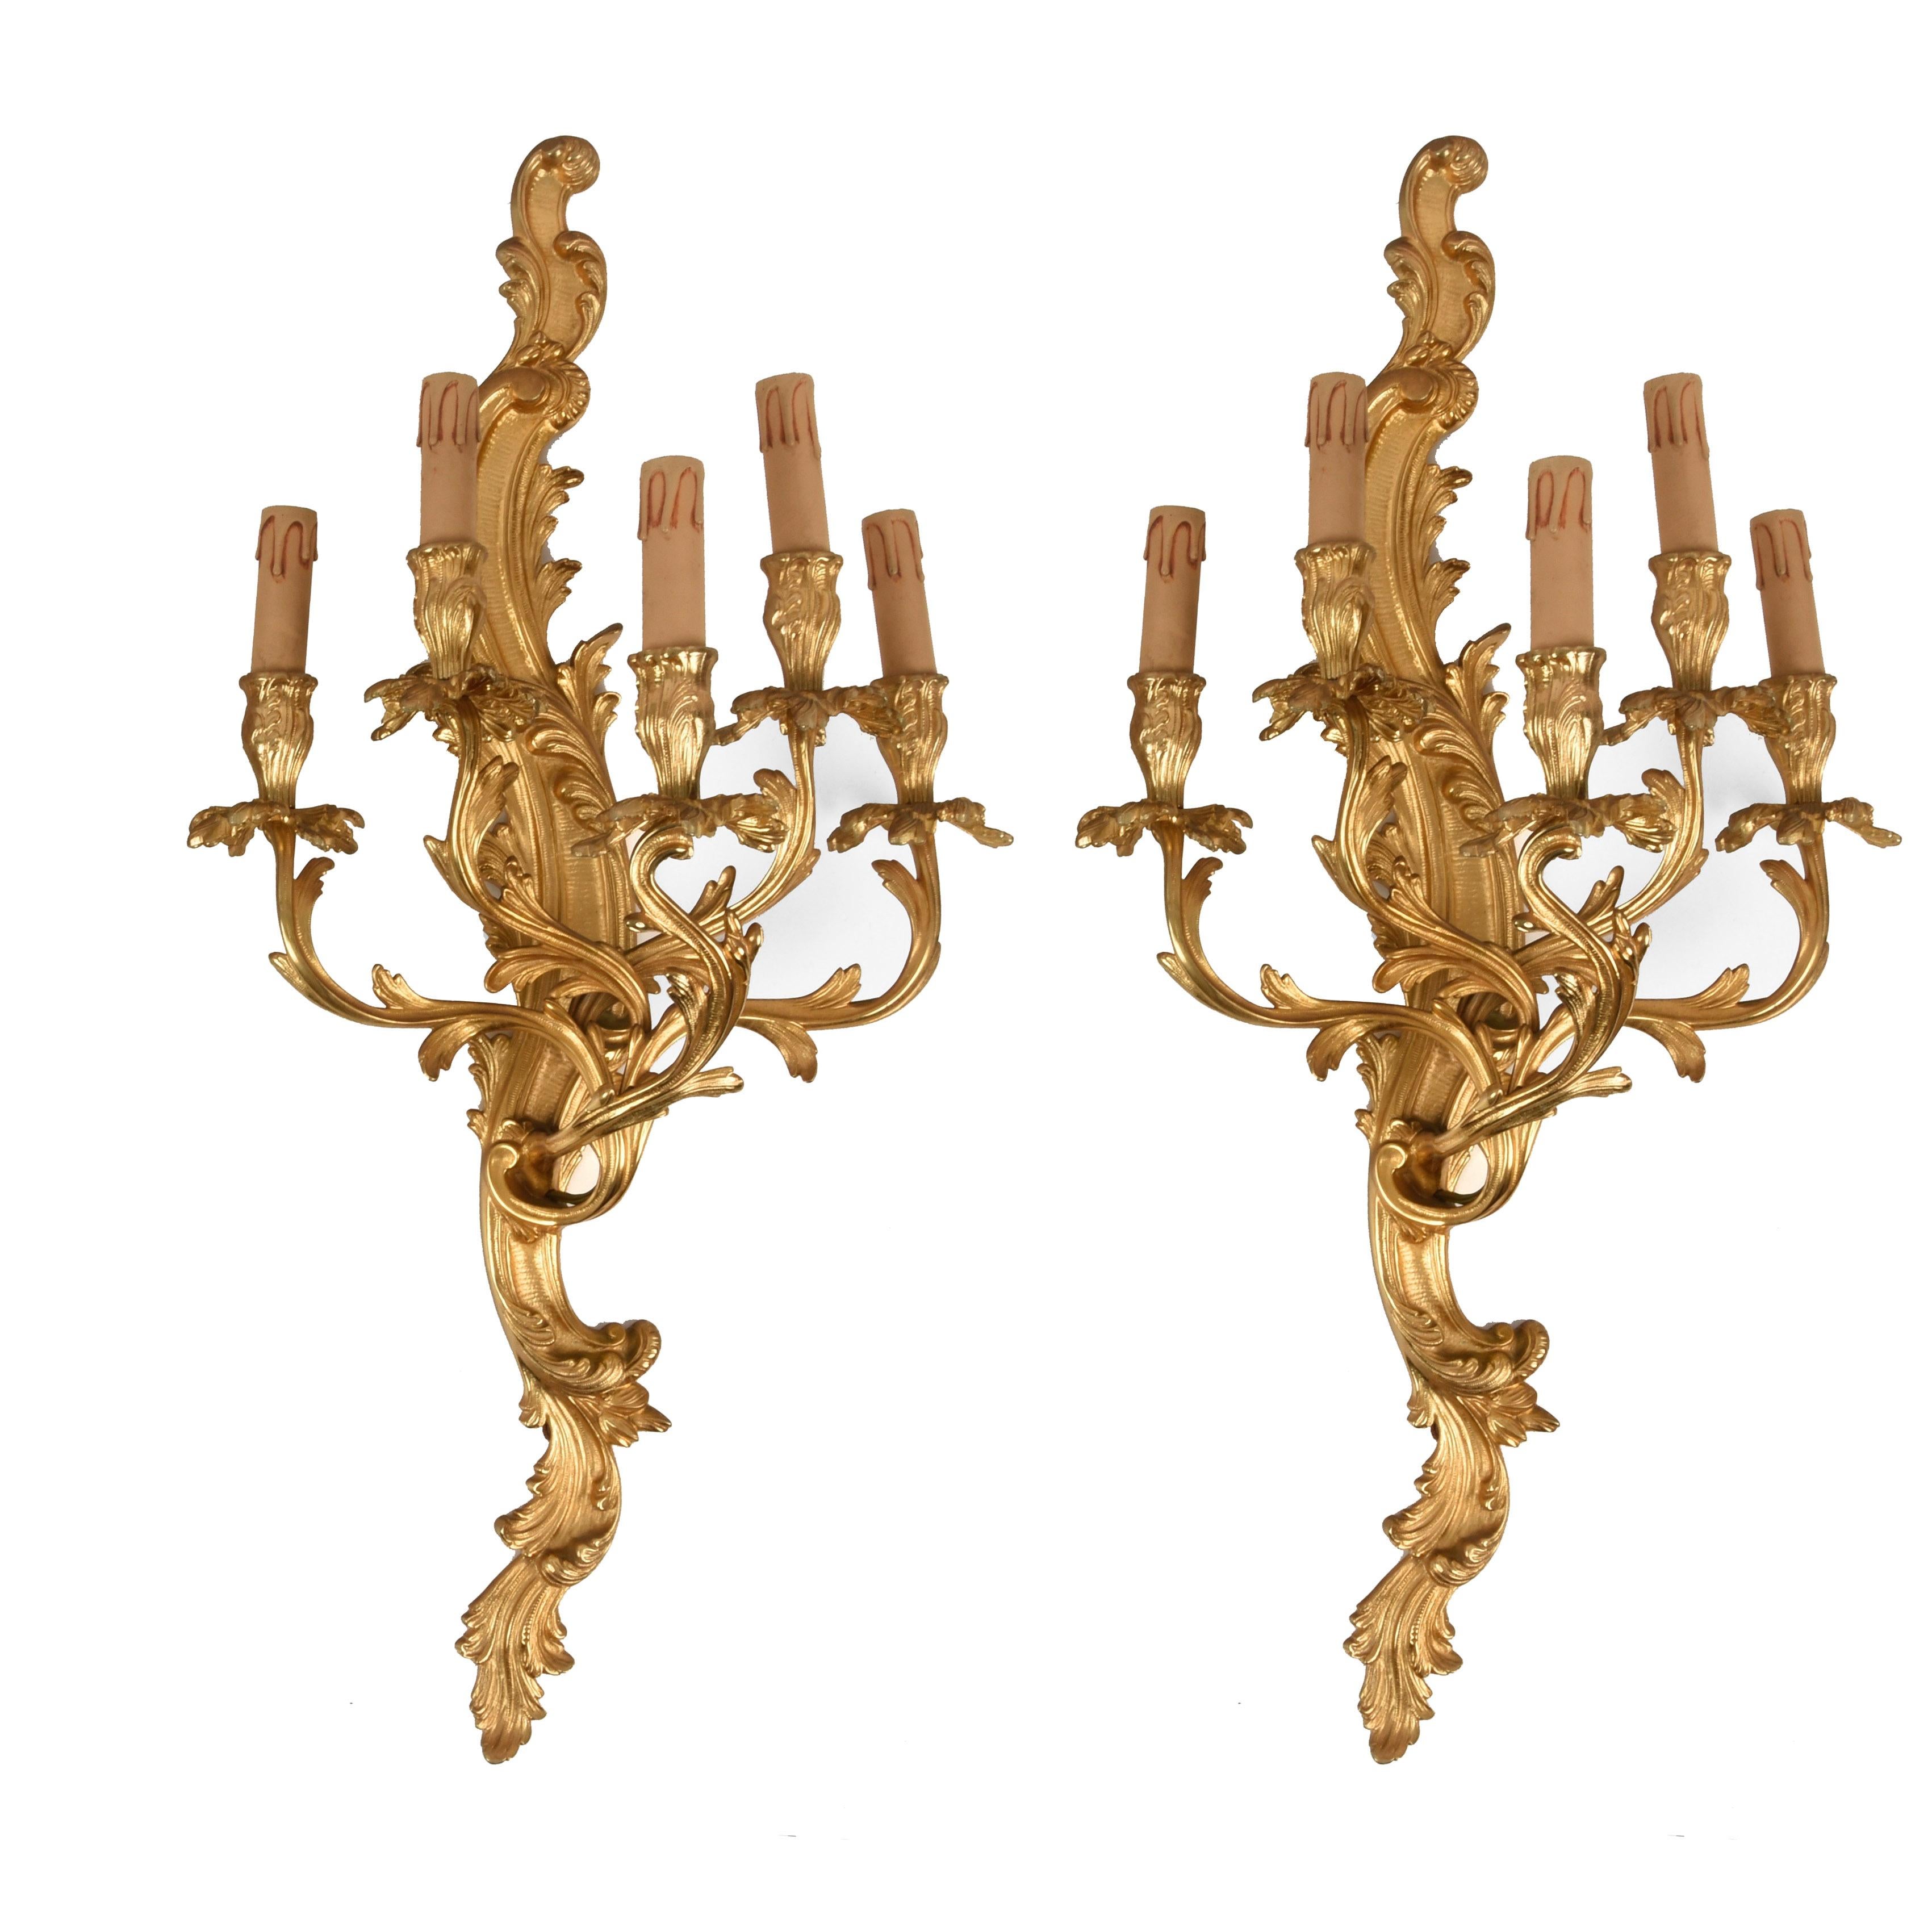 Sumptuous and large pair of 5-light sconces in gilt bronze. This fantastic set was made in the early 20th century in the style of Louis XV in France.

This luxurious pair is decorated with acanthus leaves and a floral theme with Ormolu gilding.